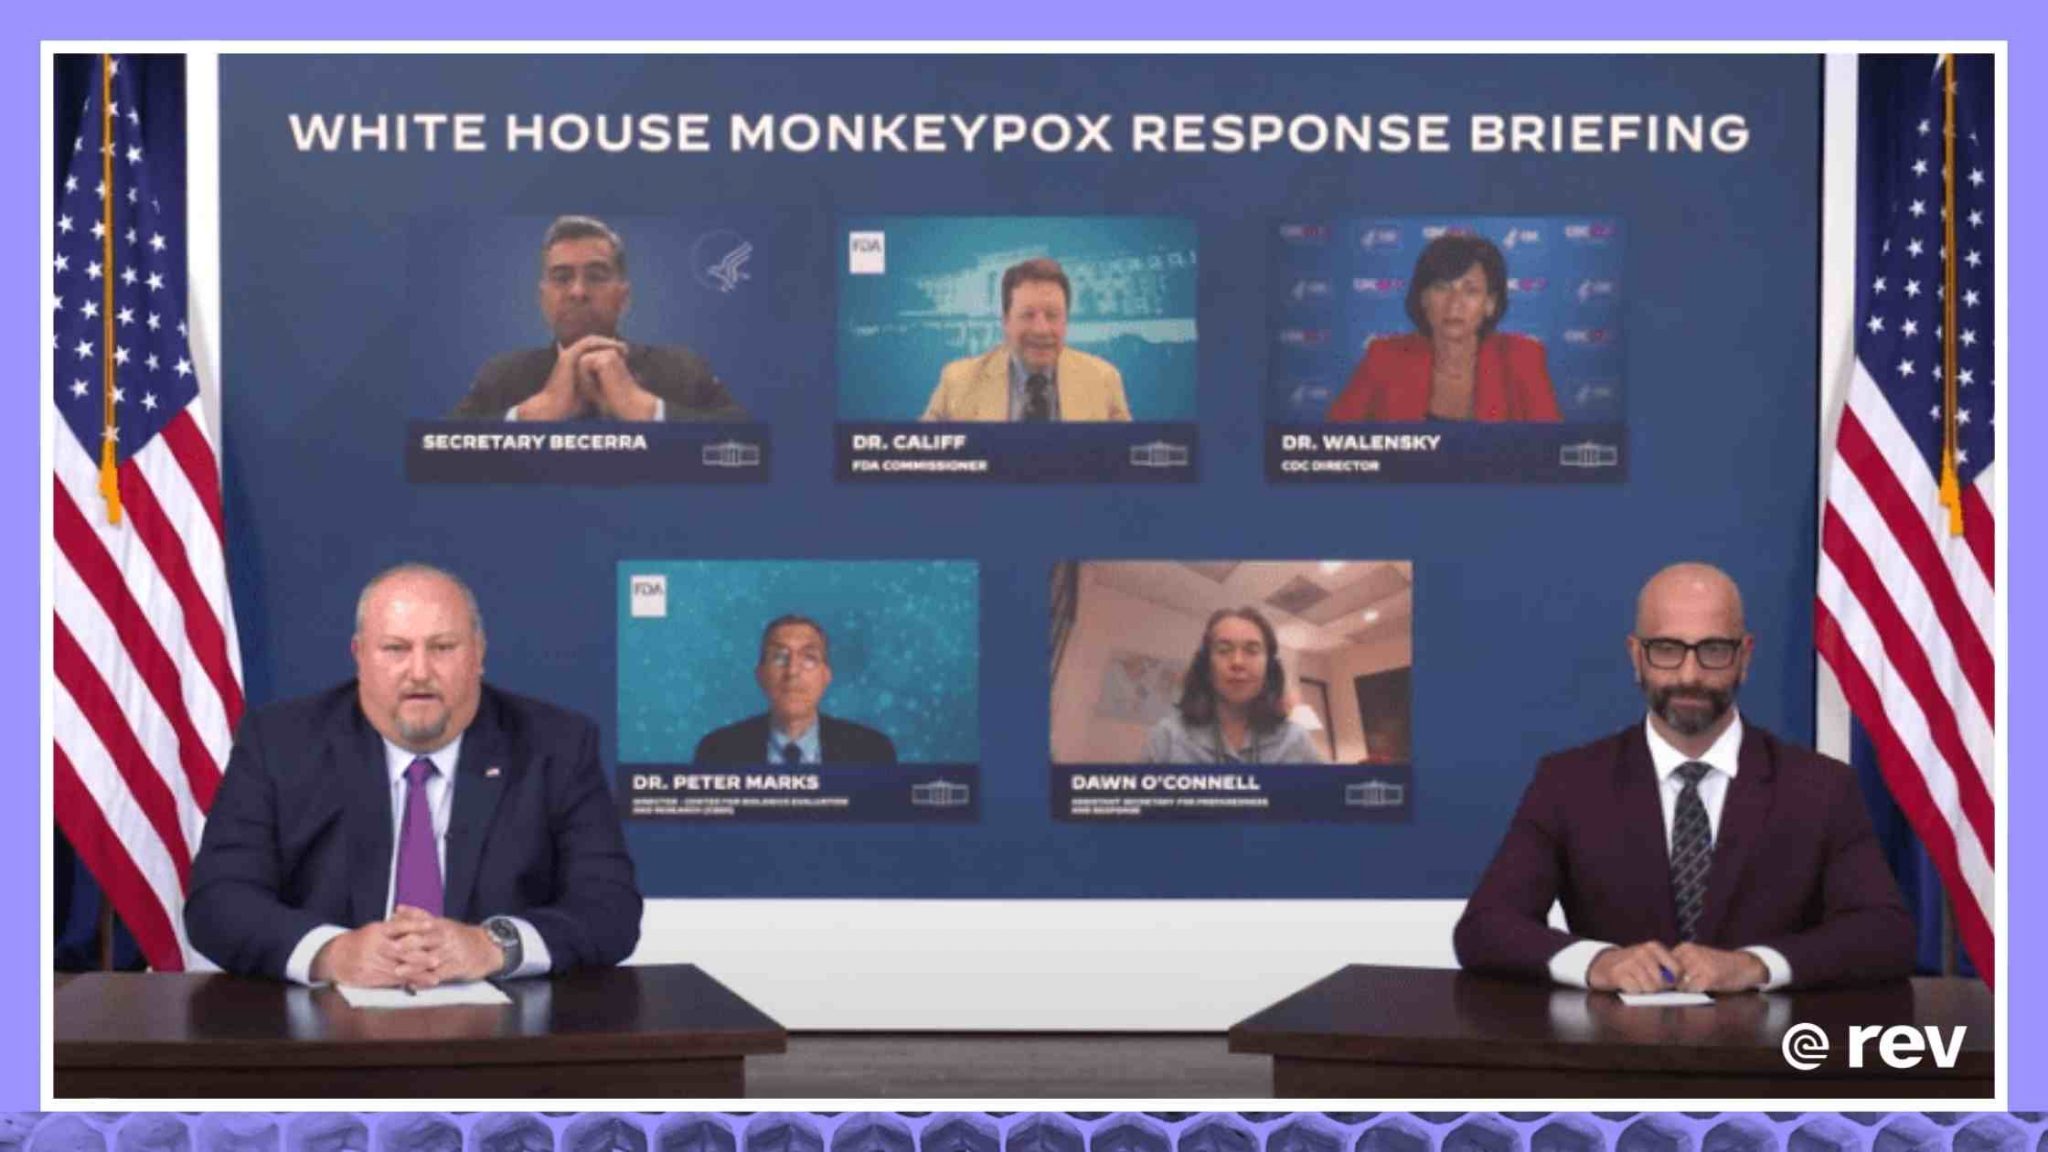 Press Briefing by White House Monkeypox Response Team and Public Health Officials 8/09/22 Transcript